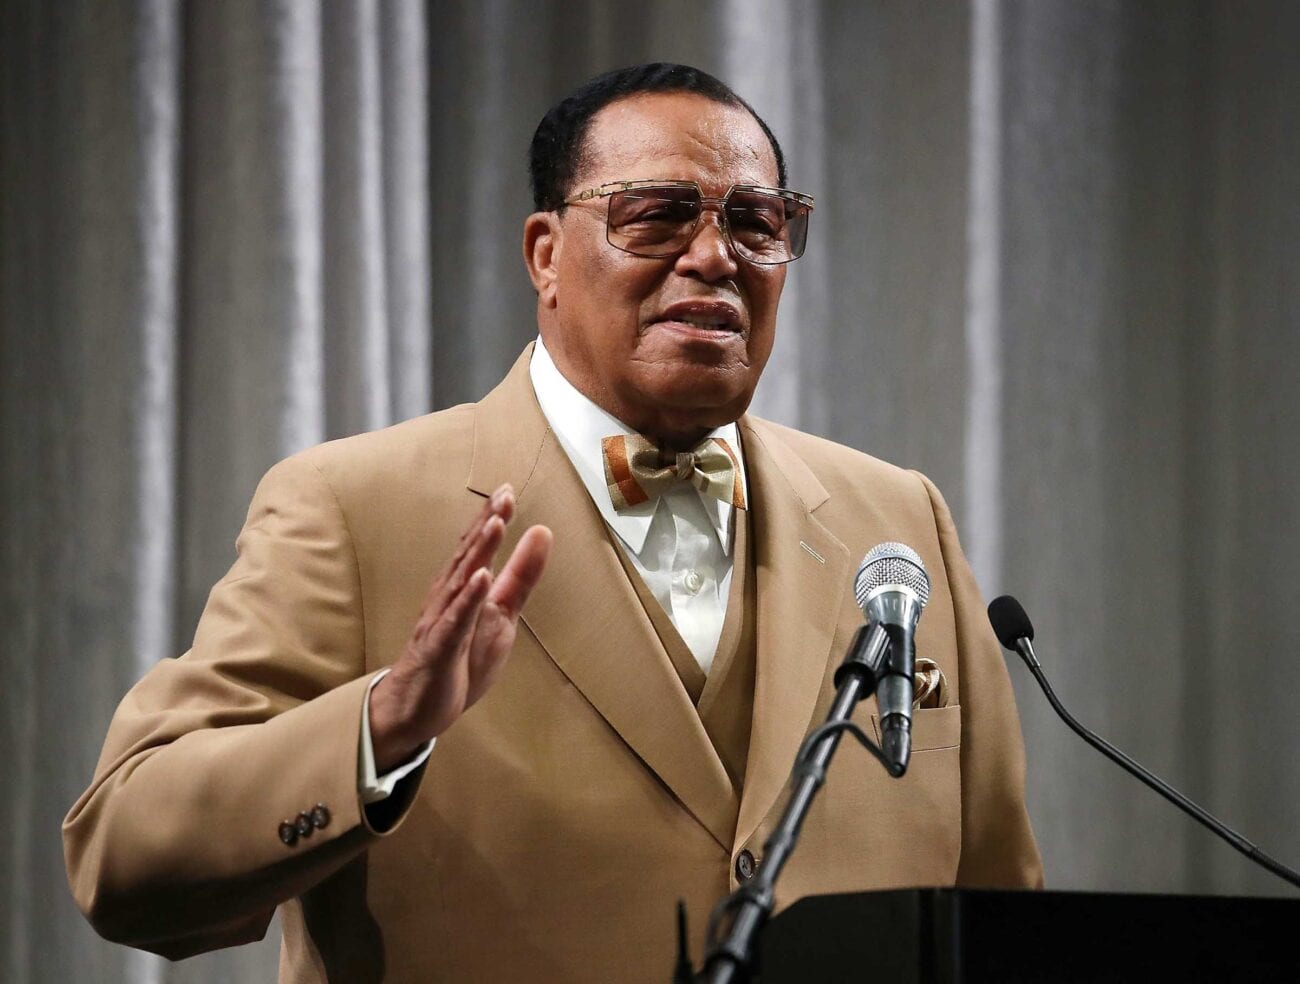 If you have never heard of Farrakhan nor his views, it may seem confusing that a man leading a black movement is accused of antisemitism.